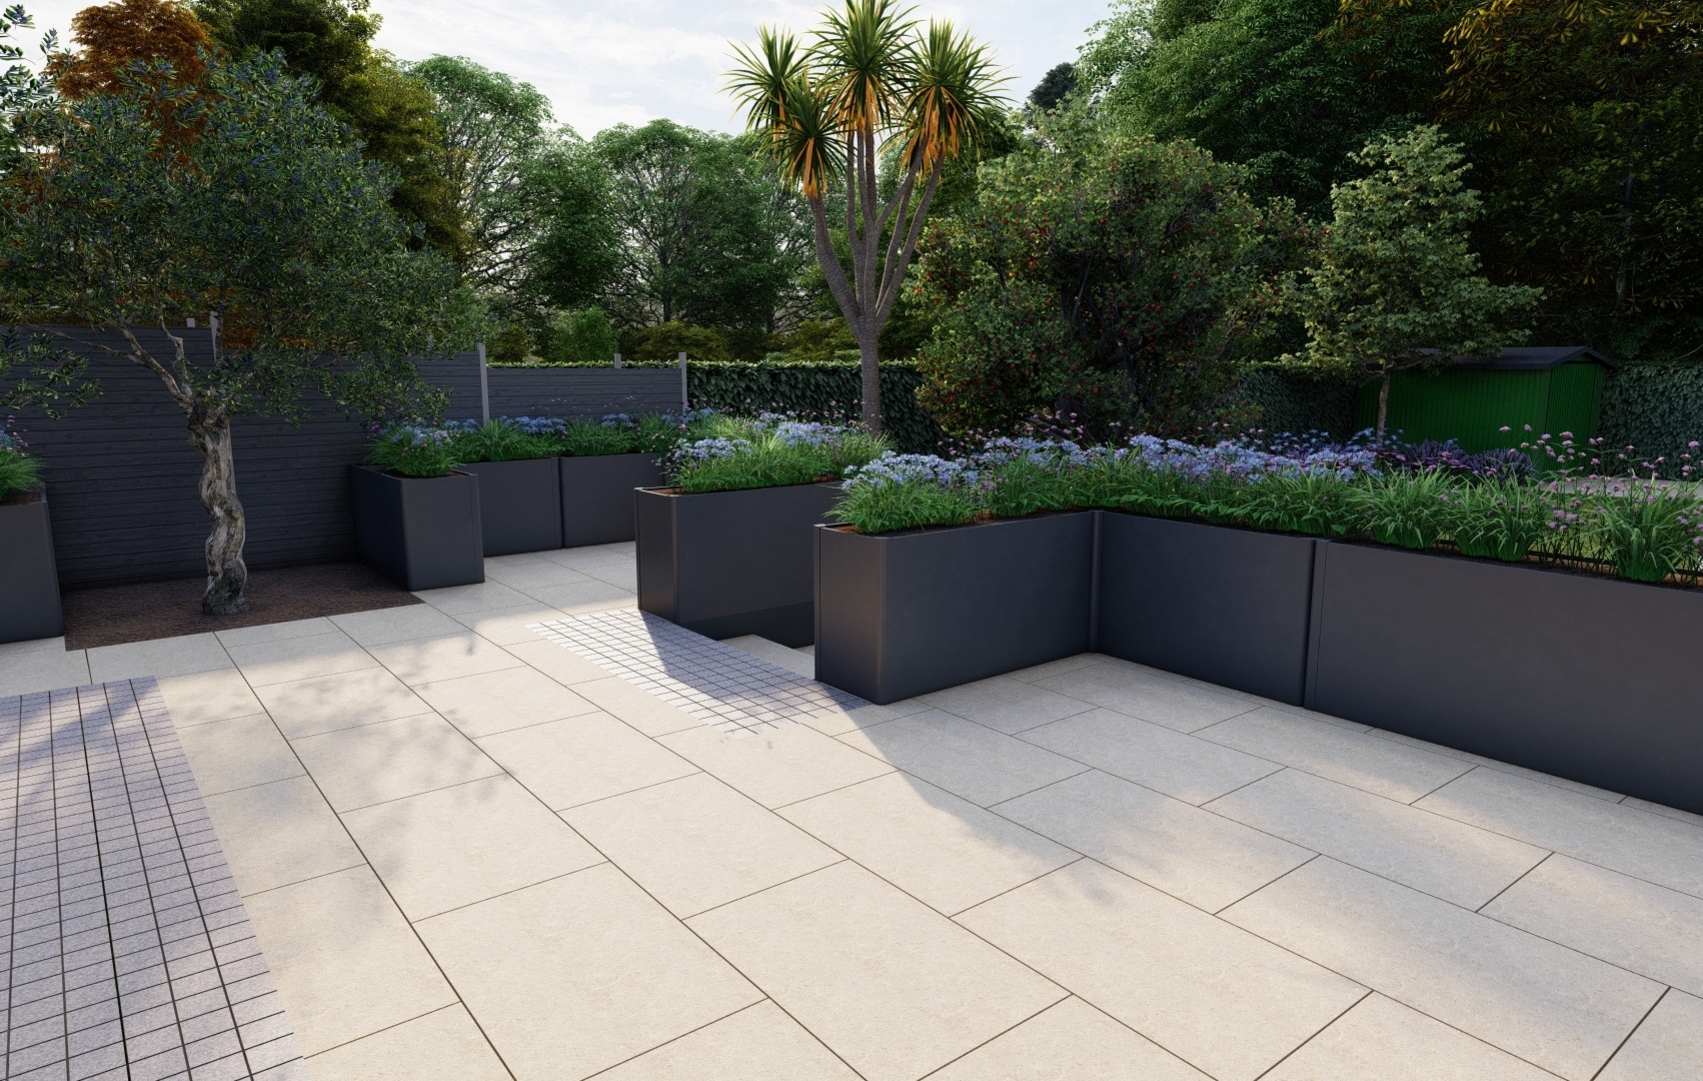 A Garden Design for a large Family garden in Mount Merrion, Co Dublin features an expansive  Raised Patio with the emphasis on the provision of space for separate formal & casual dining areas framed by stunning Biohort Steel Planters, Egyptian Limestone paving, colourful low maintenance Herbaceous planted borders and large lawn area |   Owen Chubb Garden Design, Tel 087-2306 128